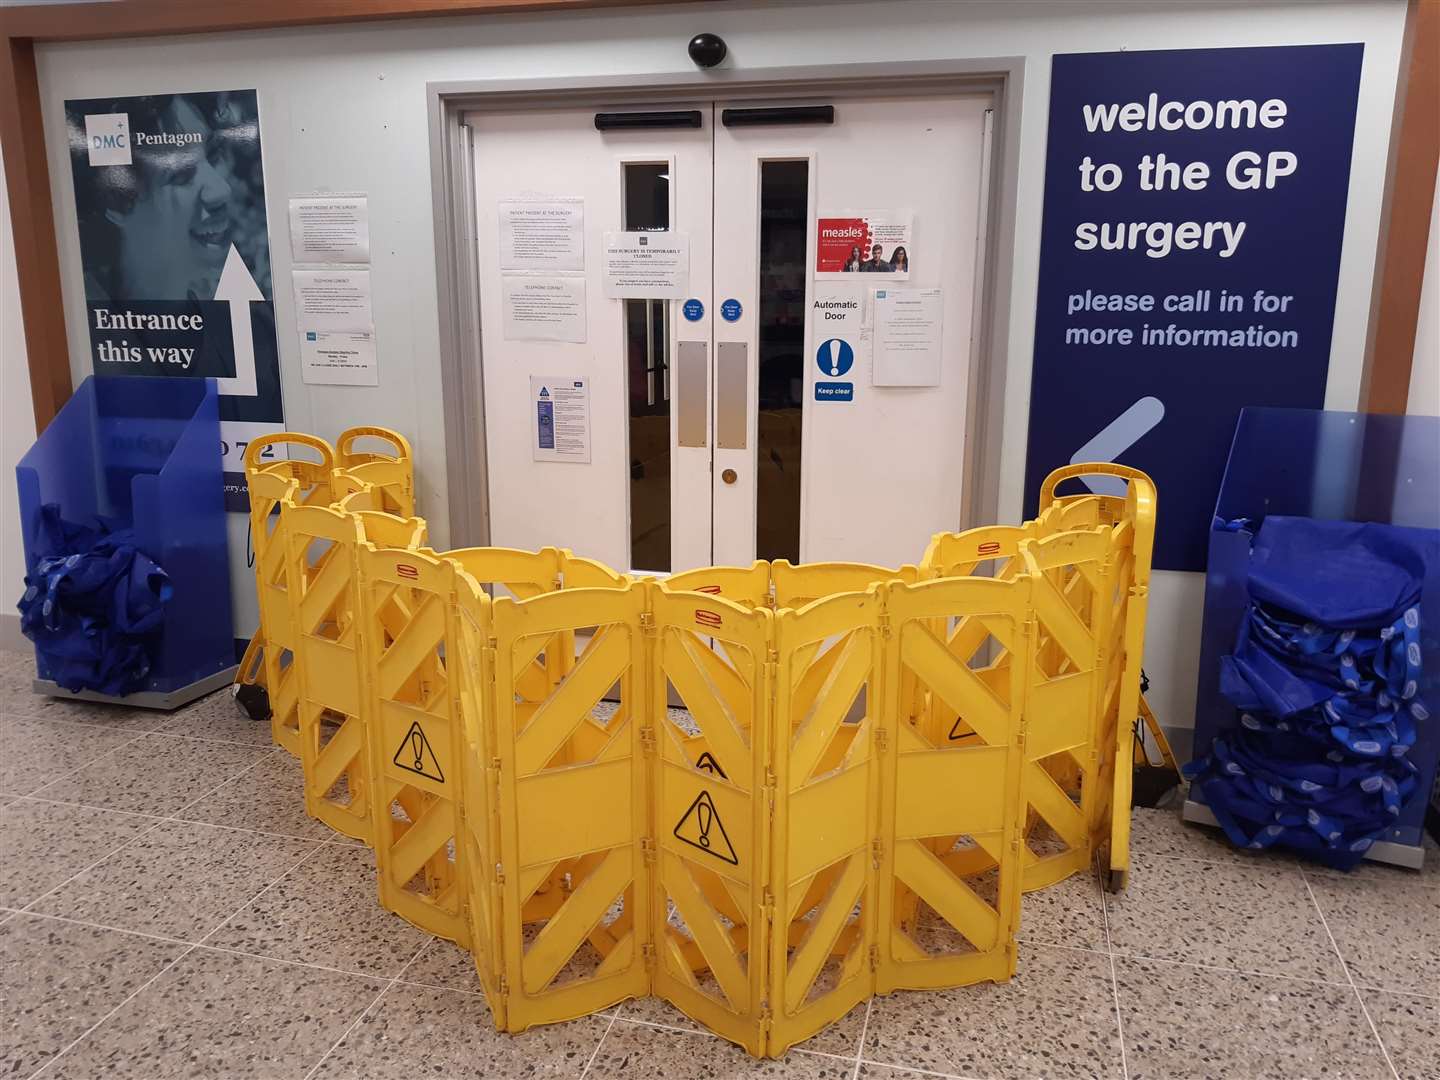 The blocked off entrance to DMC Healthcare inside Boots at the Pentagon shopping centre, Chatham